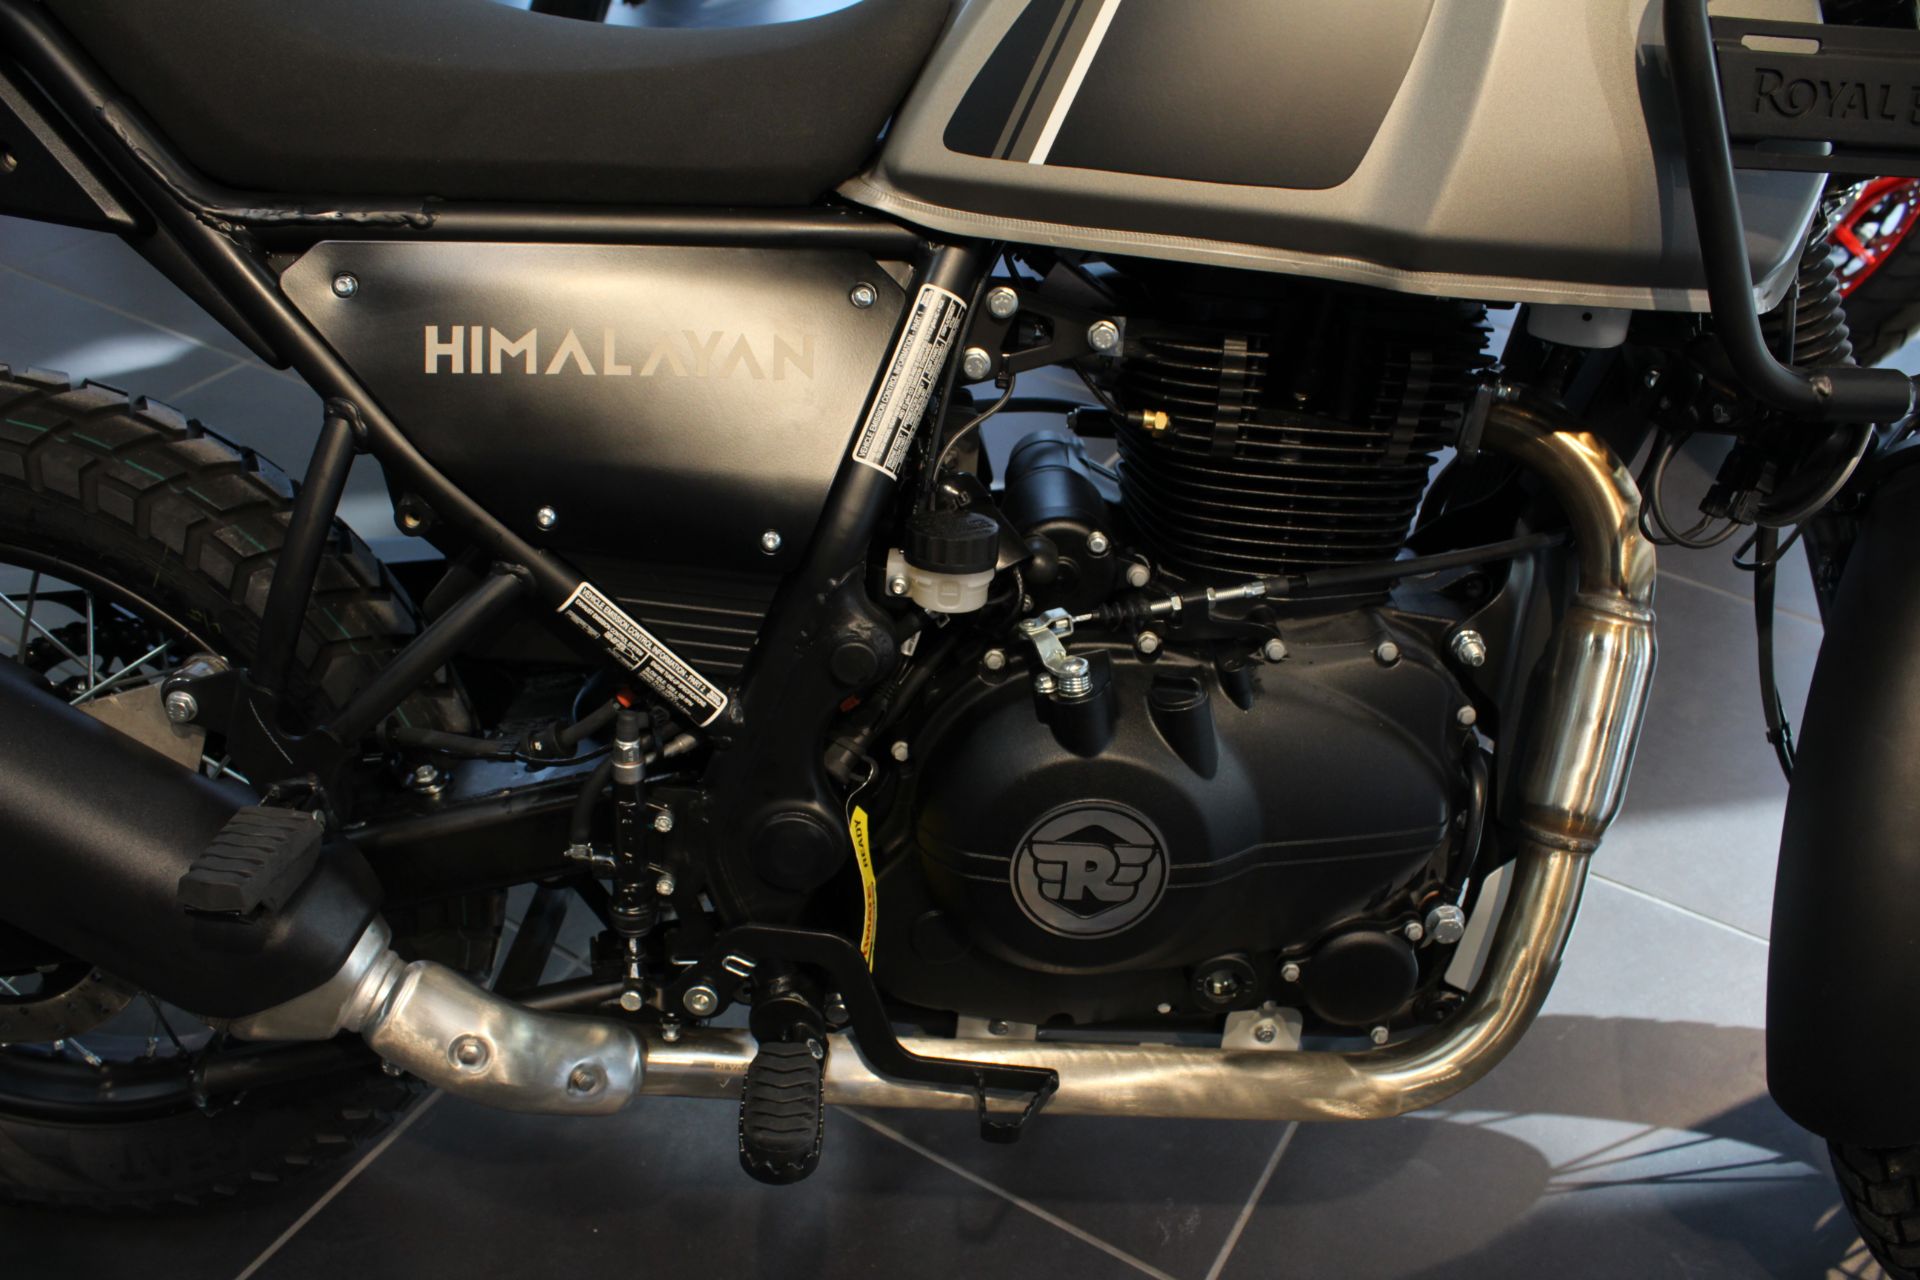 2023 Royal Enfield Himalayan in West Allis, Wisconsin - Photo 5